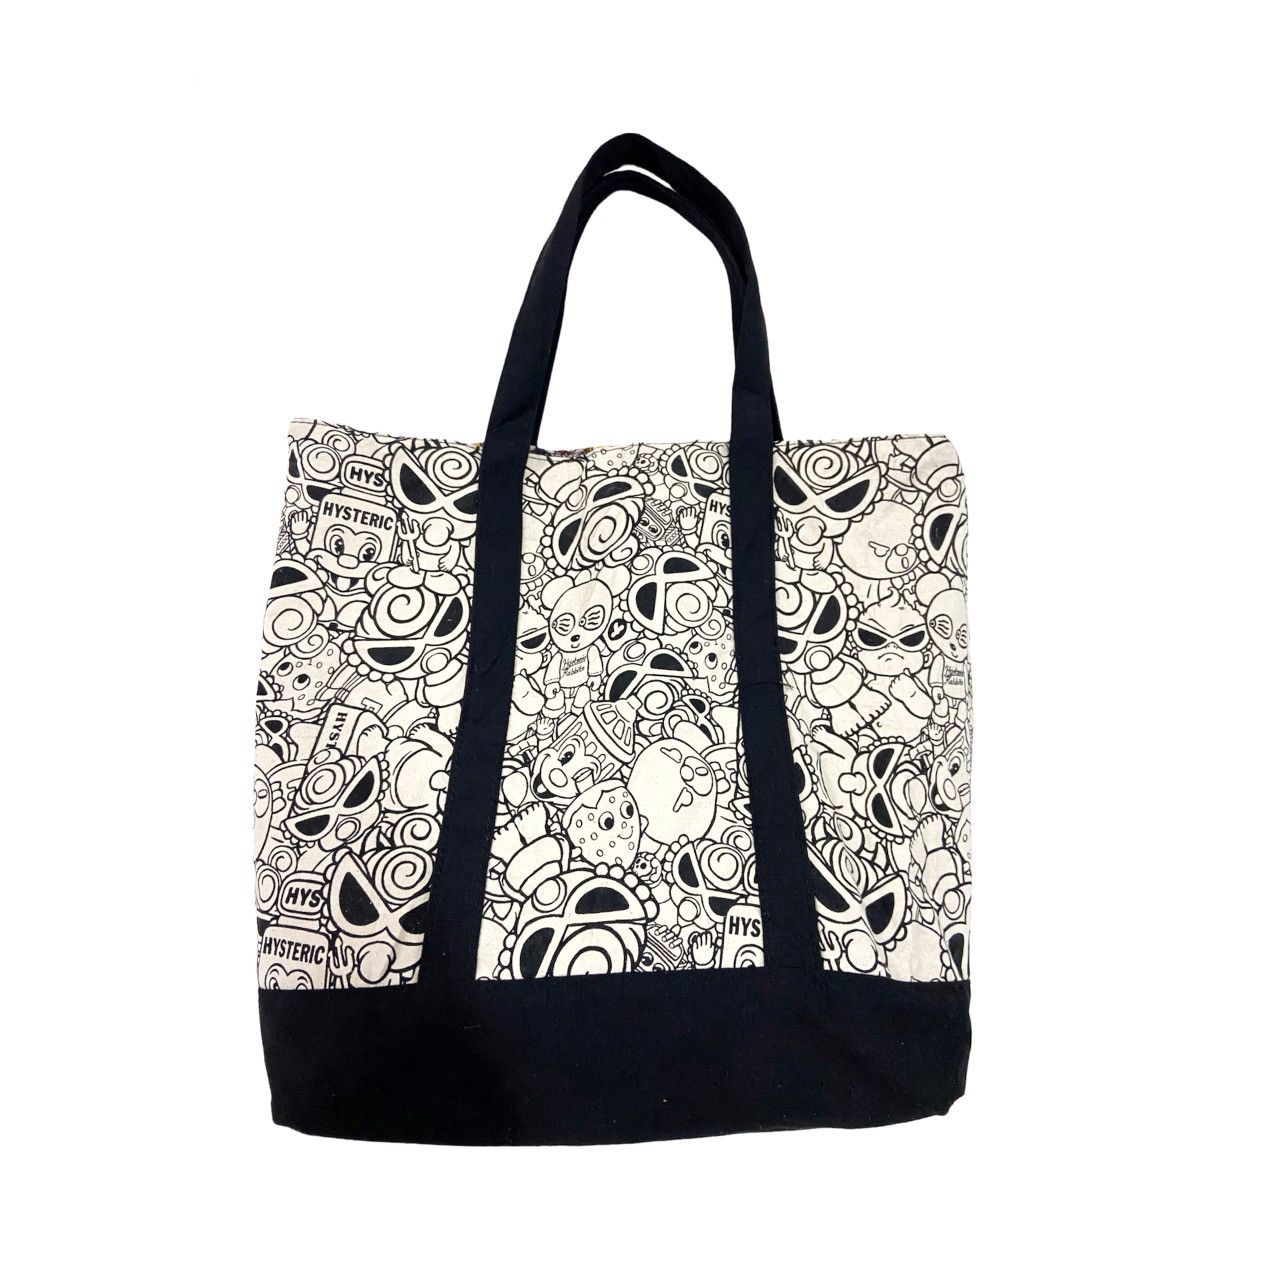 Hysteric Glamour Canvas Tote Bag Crossbody - 2